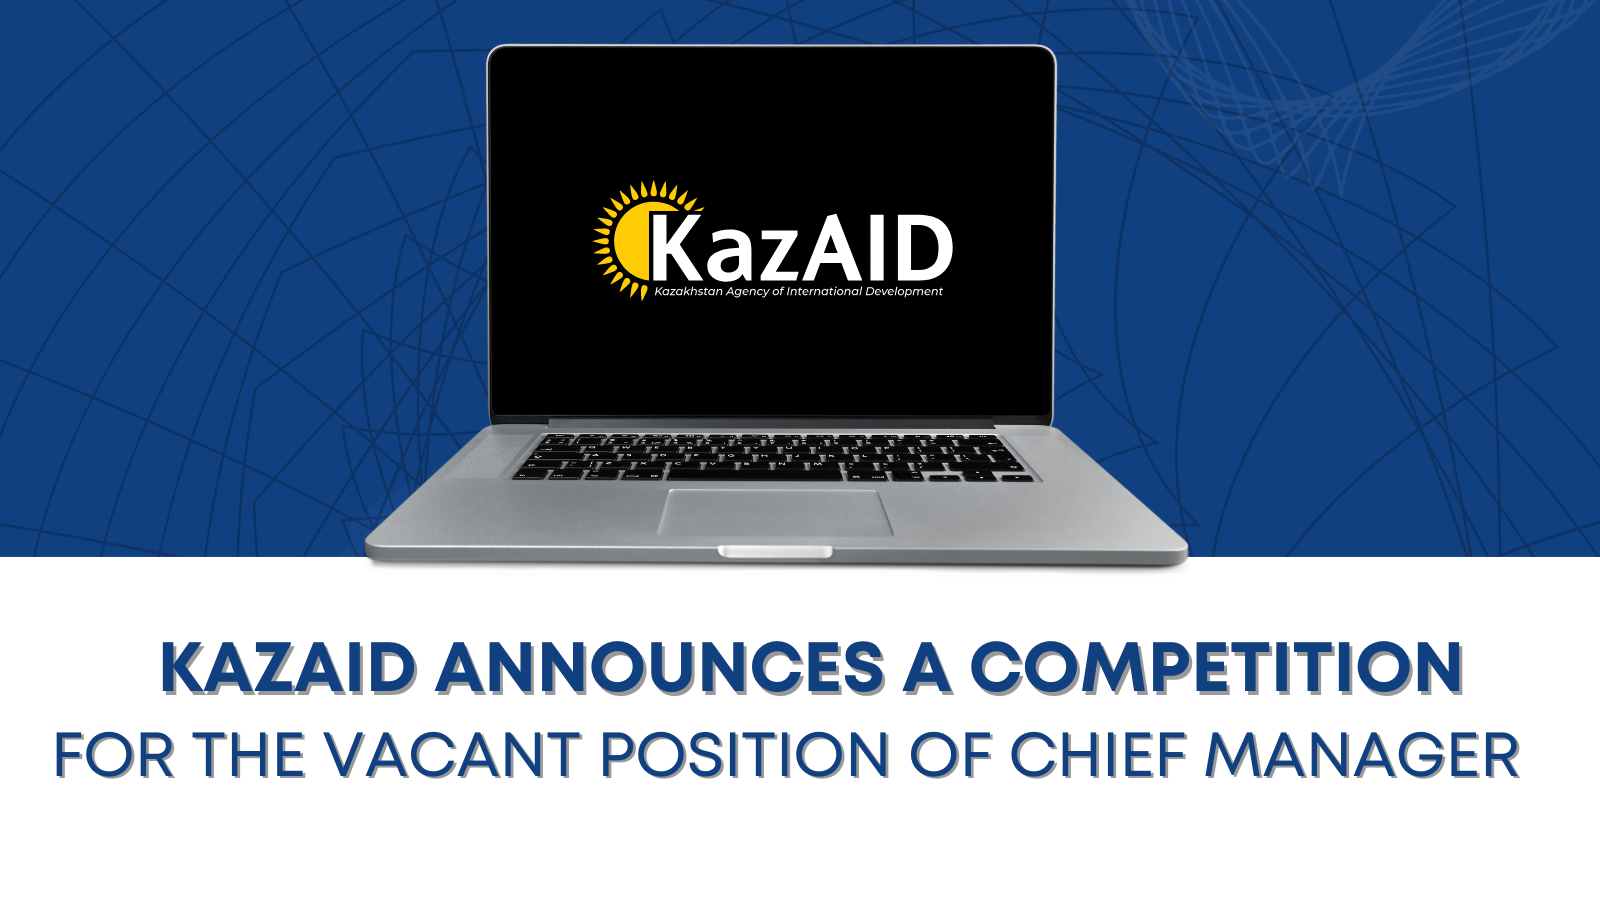 "Kazakhstan Agency of International Development "KazAID" announces a competition for the vacant position of Chief Manager